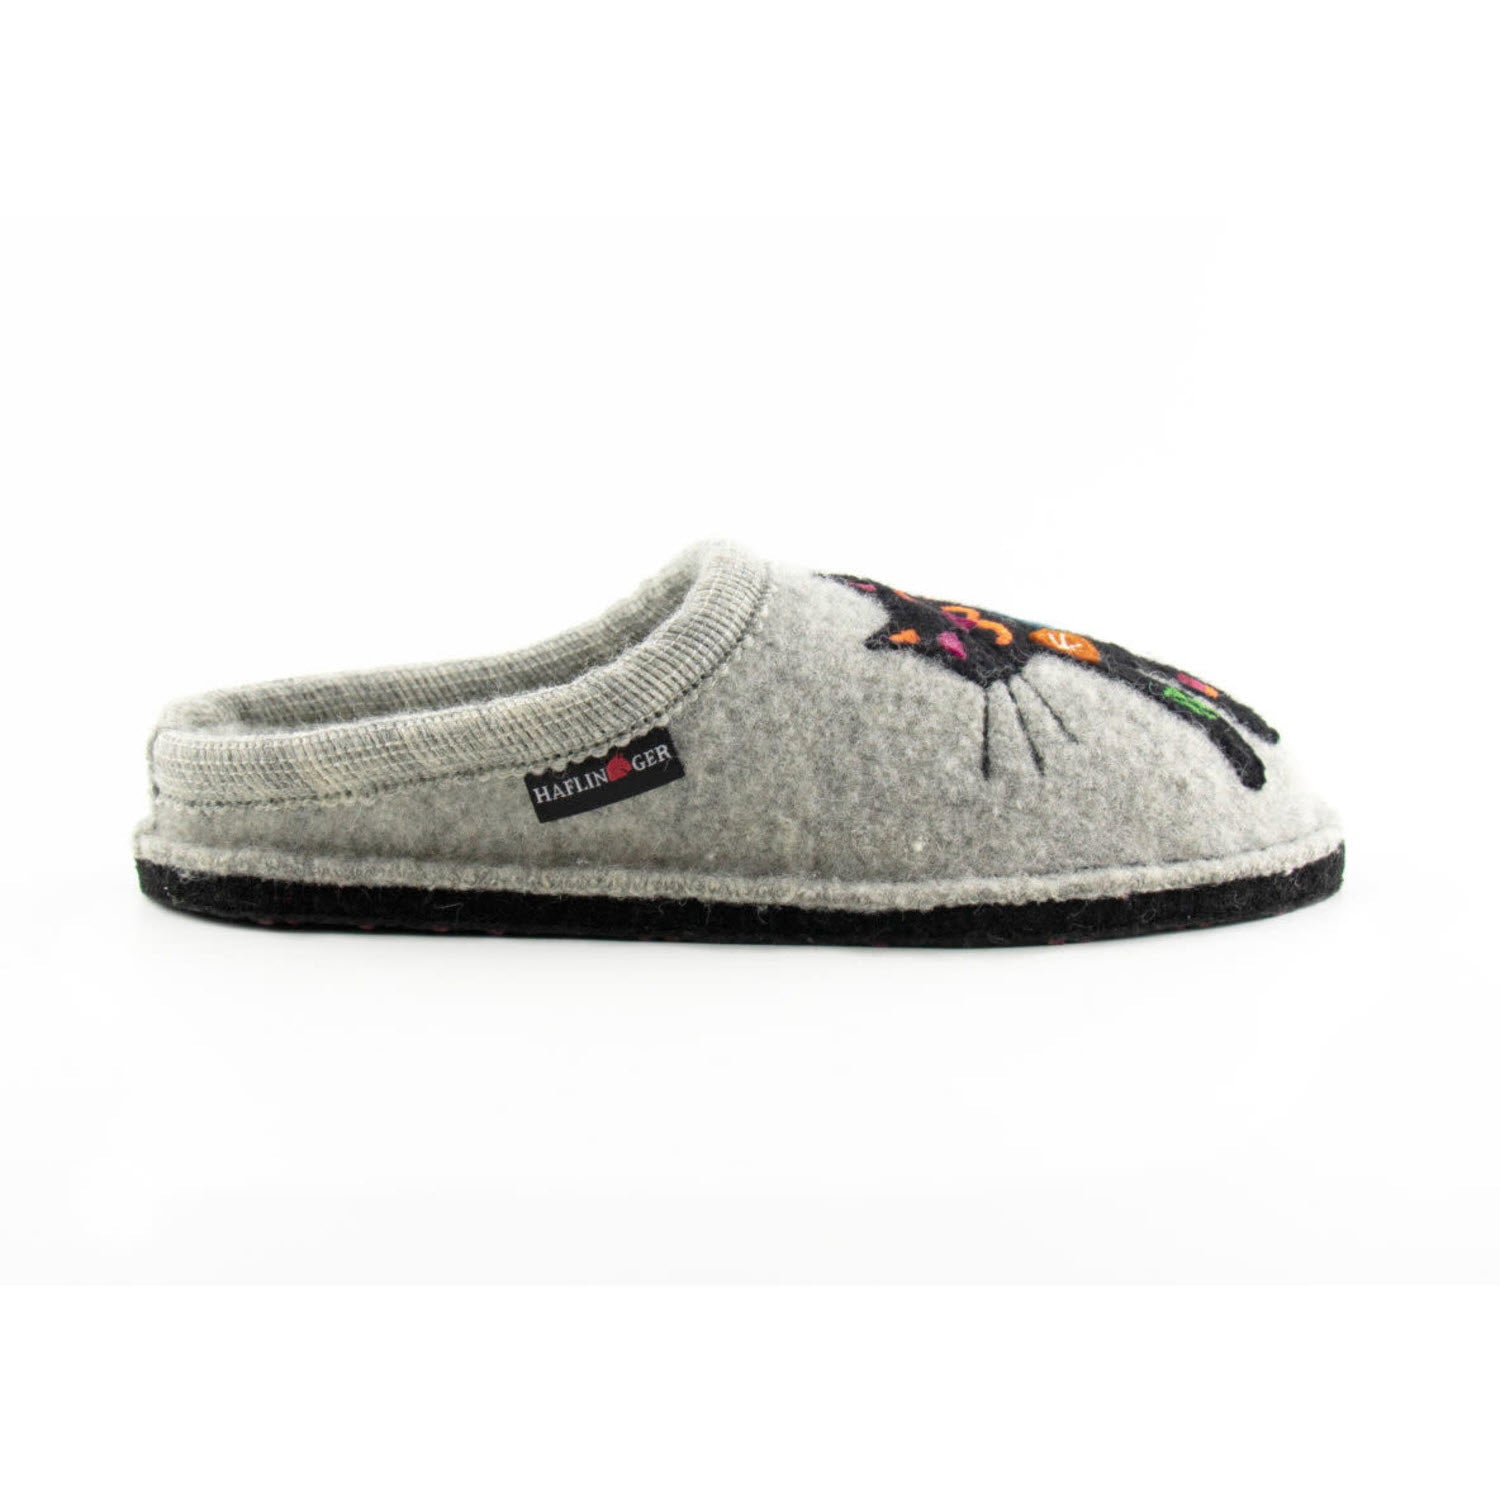 A Haflingers Sassy Grey slipper with a floral embroidery design on the toe, featuring a black sole and a visible brand label on the side.